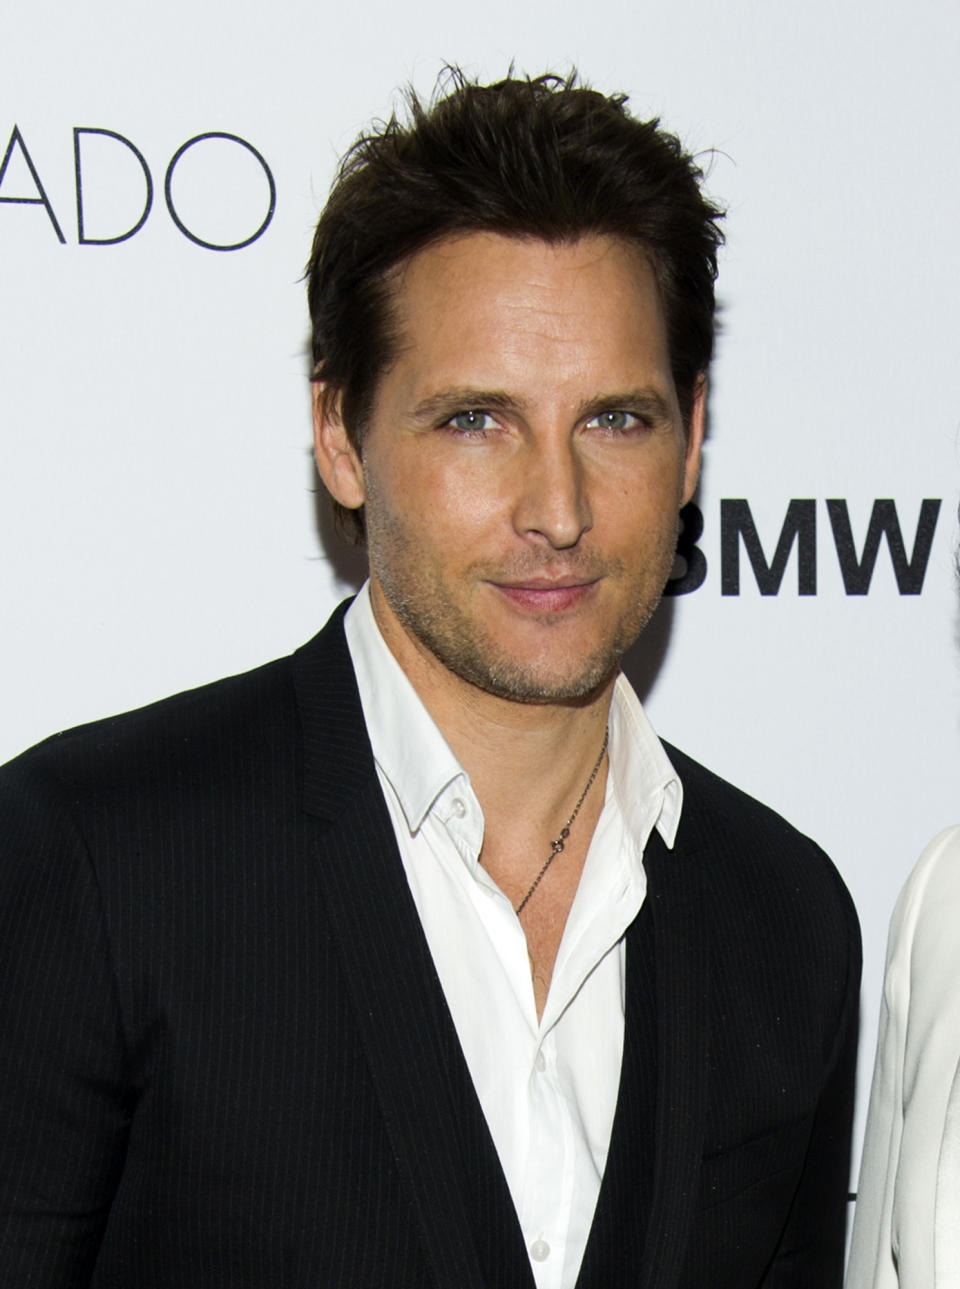 FILE - This Oct. 23, 2013 file photo shows actor Peter Facinelli at the sixth annual GQ Gentlemen's Ball in New York. Facinelli will star with Anna Friel in the NBC the drama "Odyssey," about strangers fighting an international conspiracy involving the military, corporate interests and Middle Eastern terrorists. (Photo by Charles Sykes/Invision/AP, File)